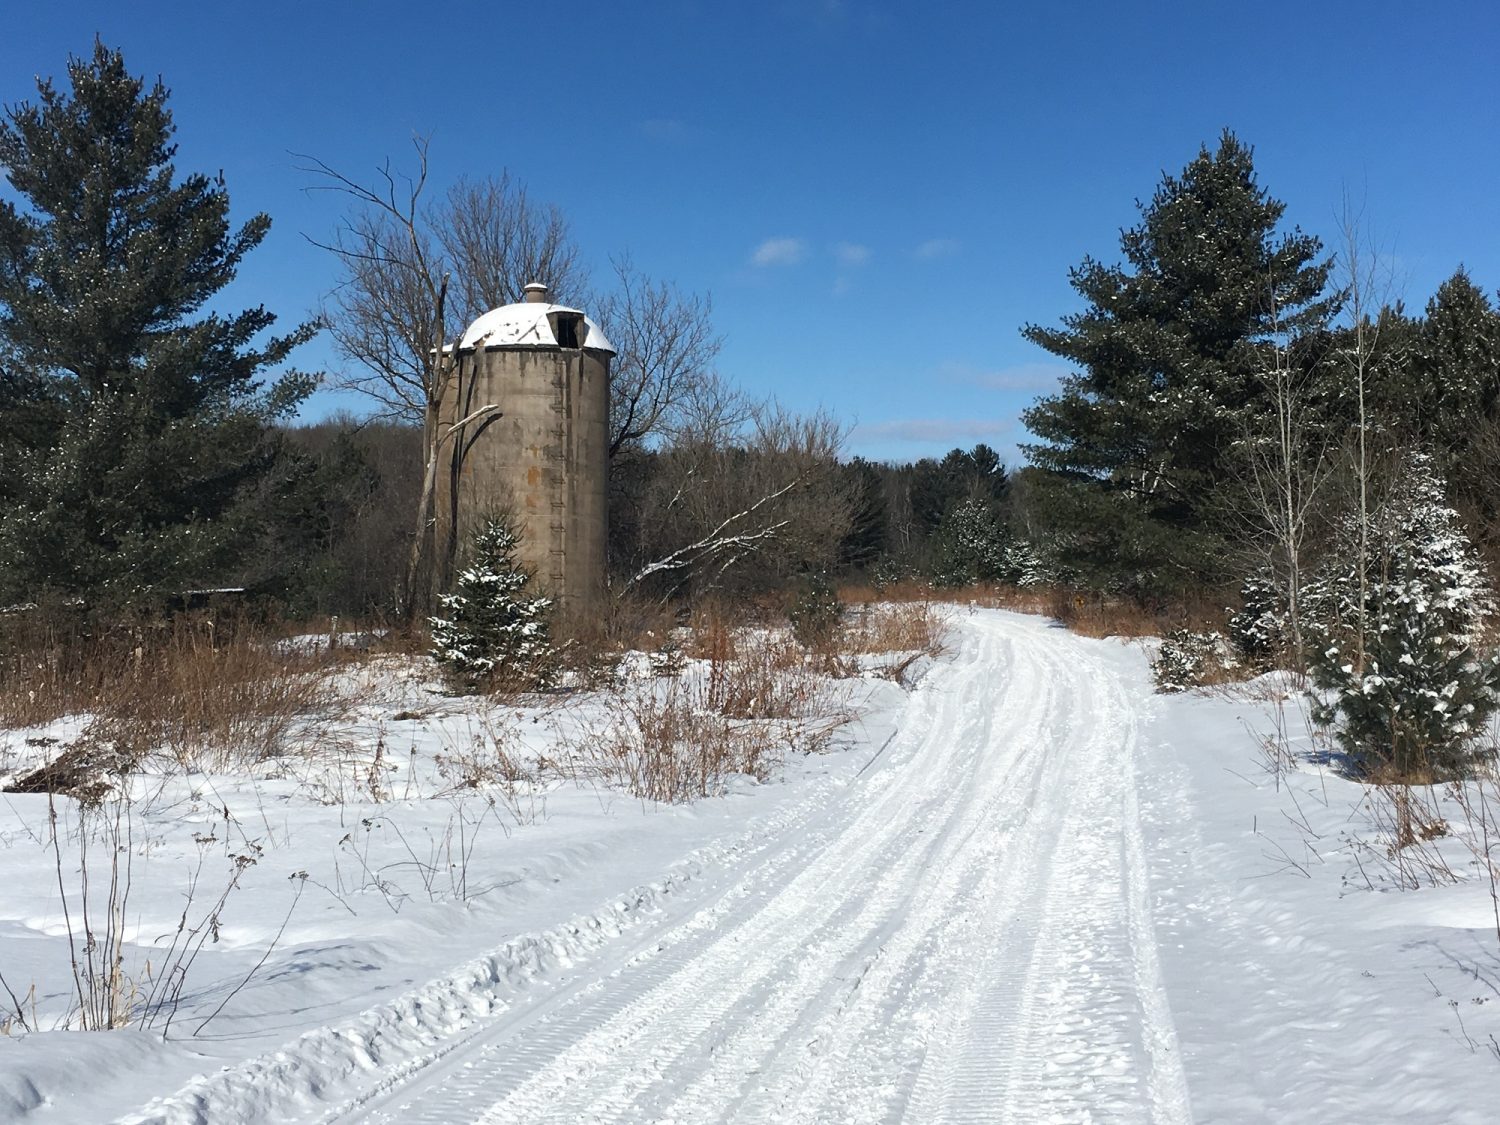 Lincoln County Snowmobile Trail Report: Week of Feb. 5, 2018